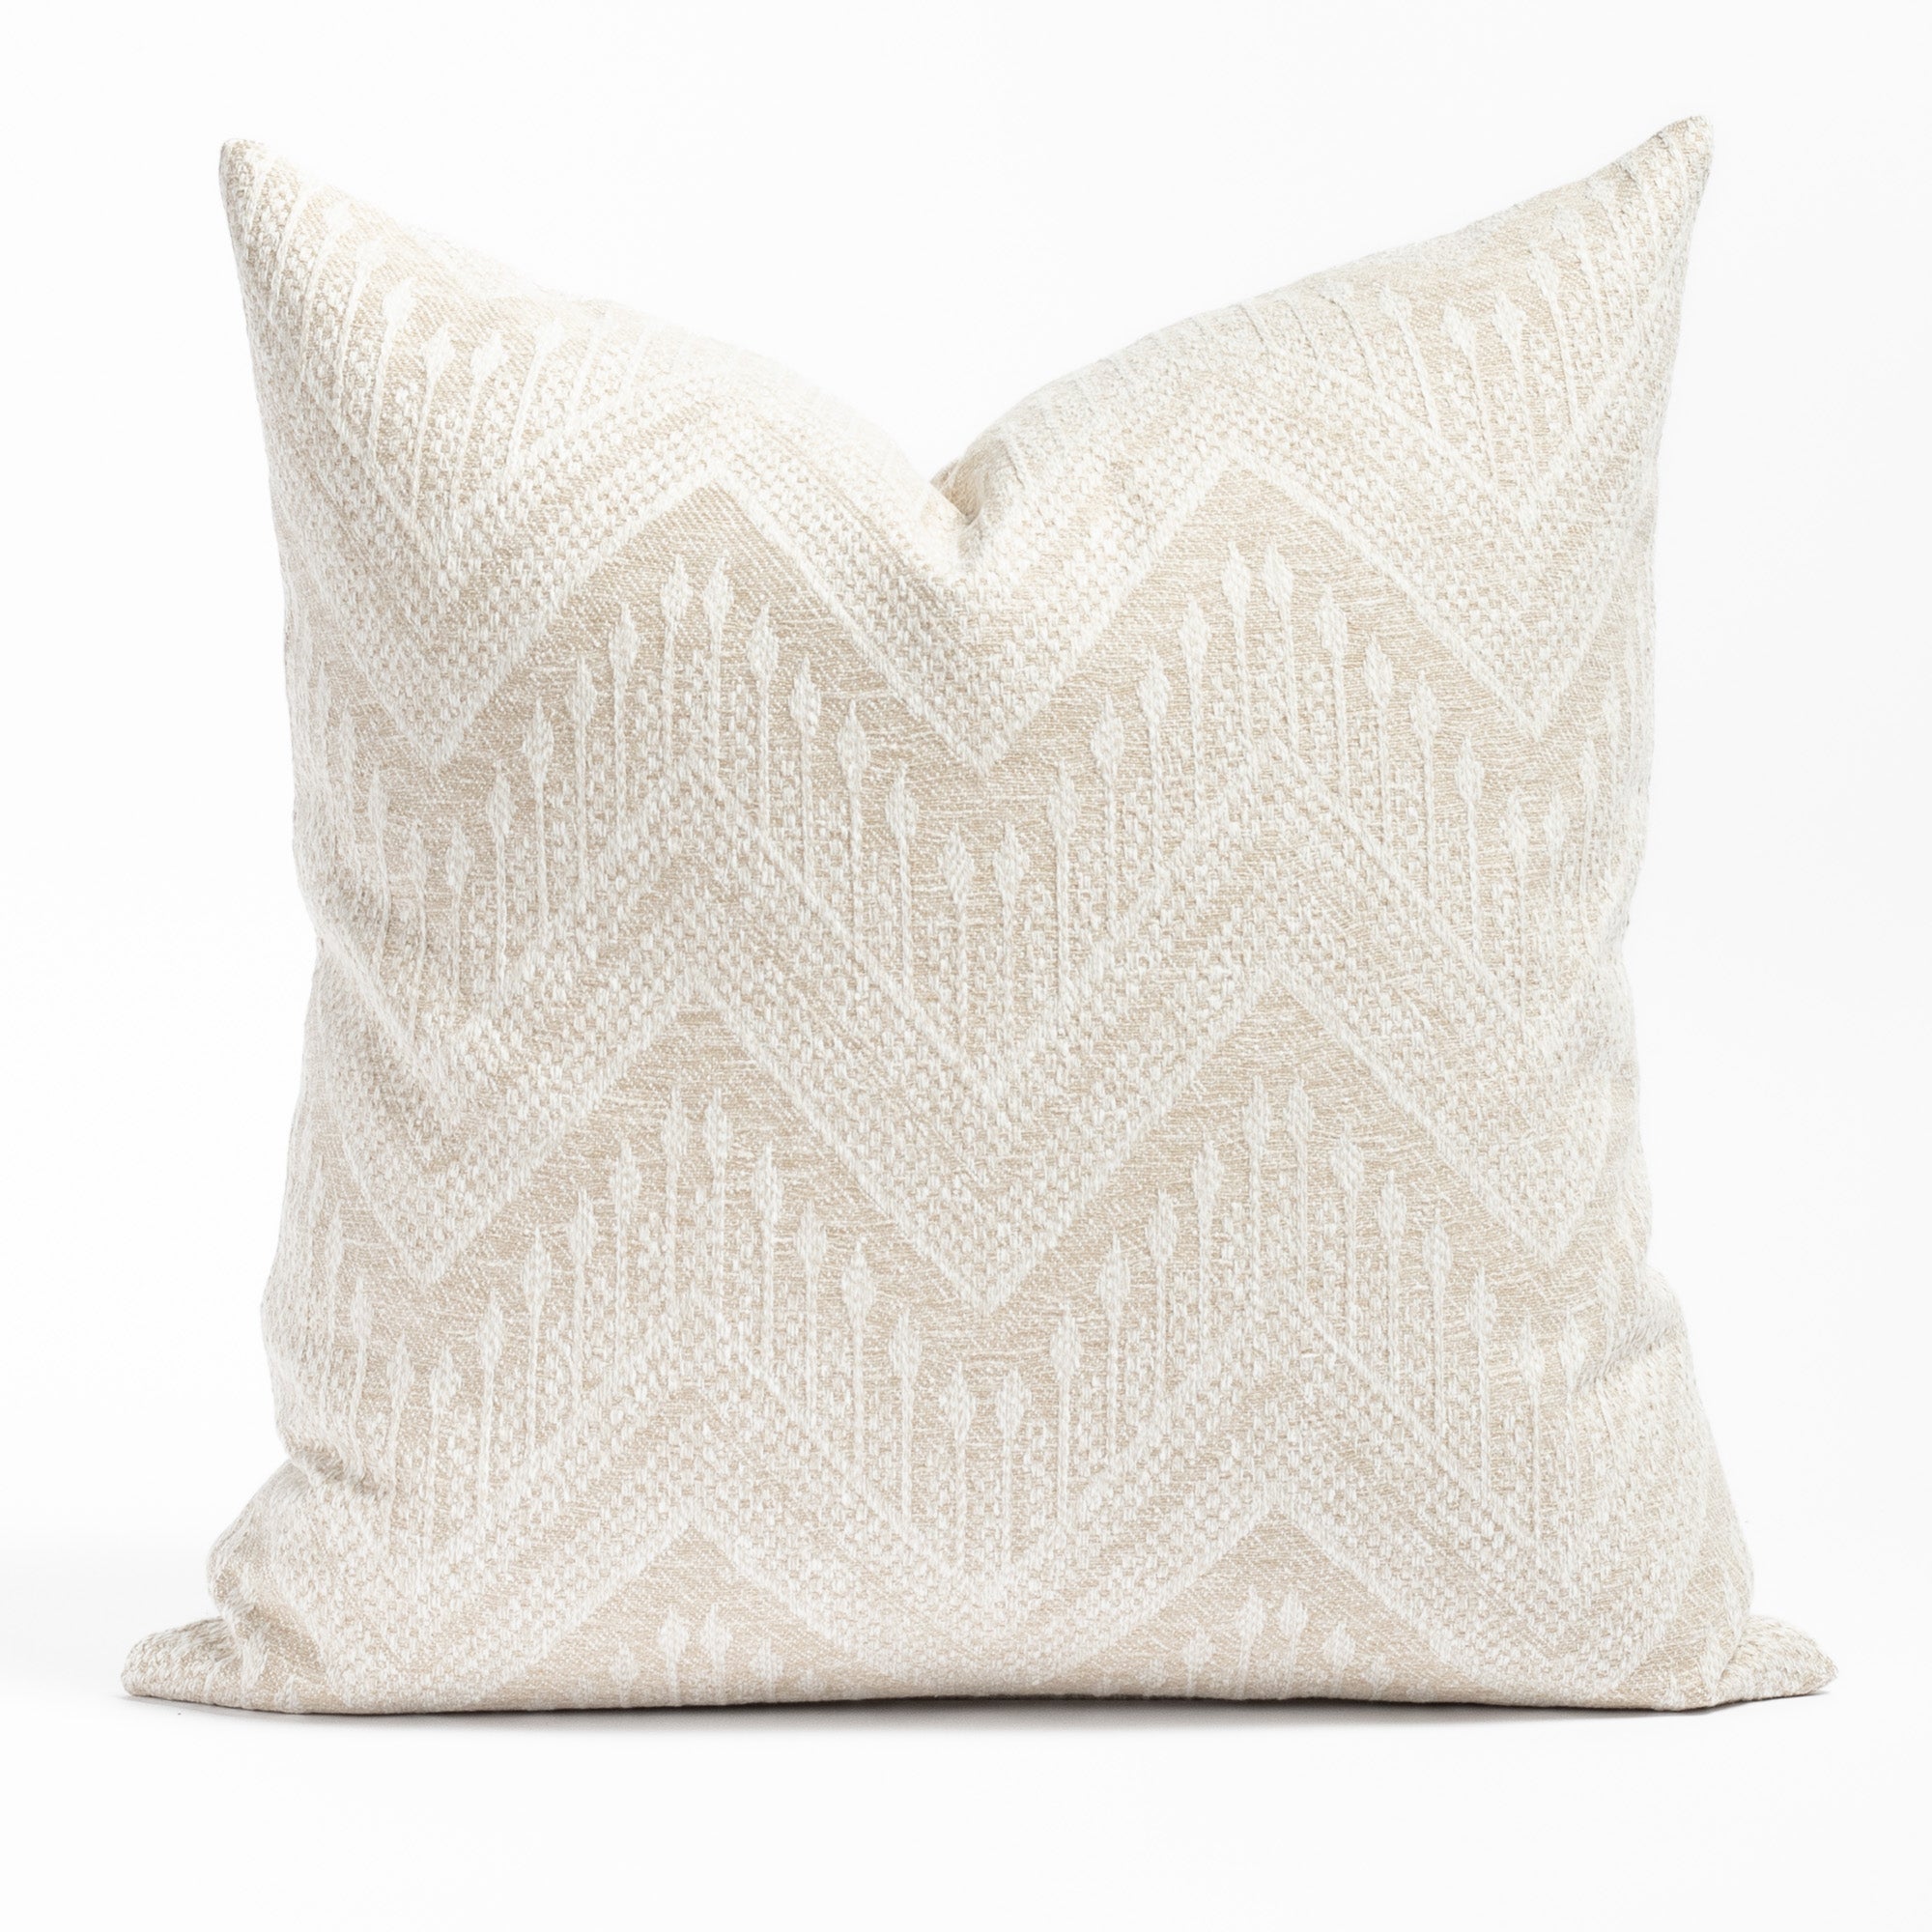 Joyce 22x22 Natural, an oatmeal beige and white intricate zigzag patterned throw pillow from Tonic Living